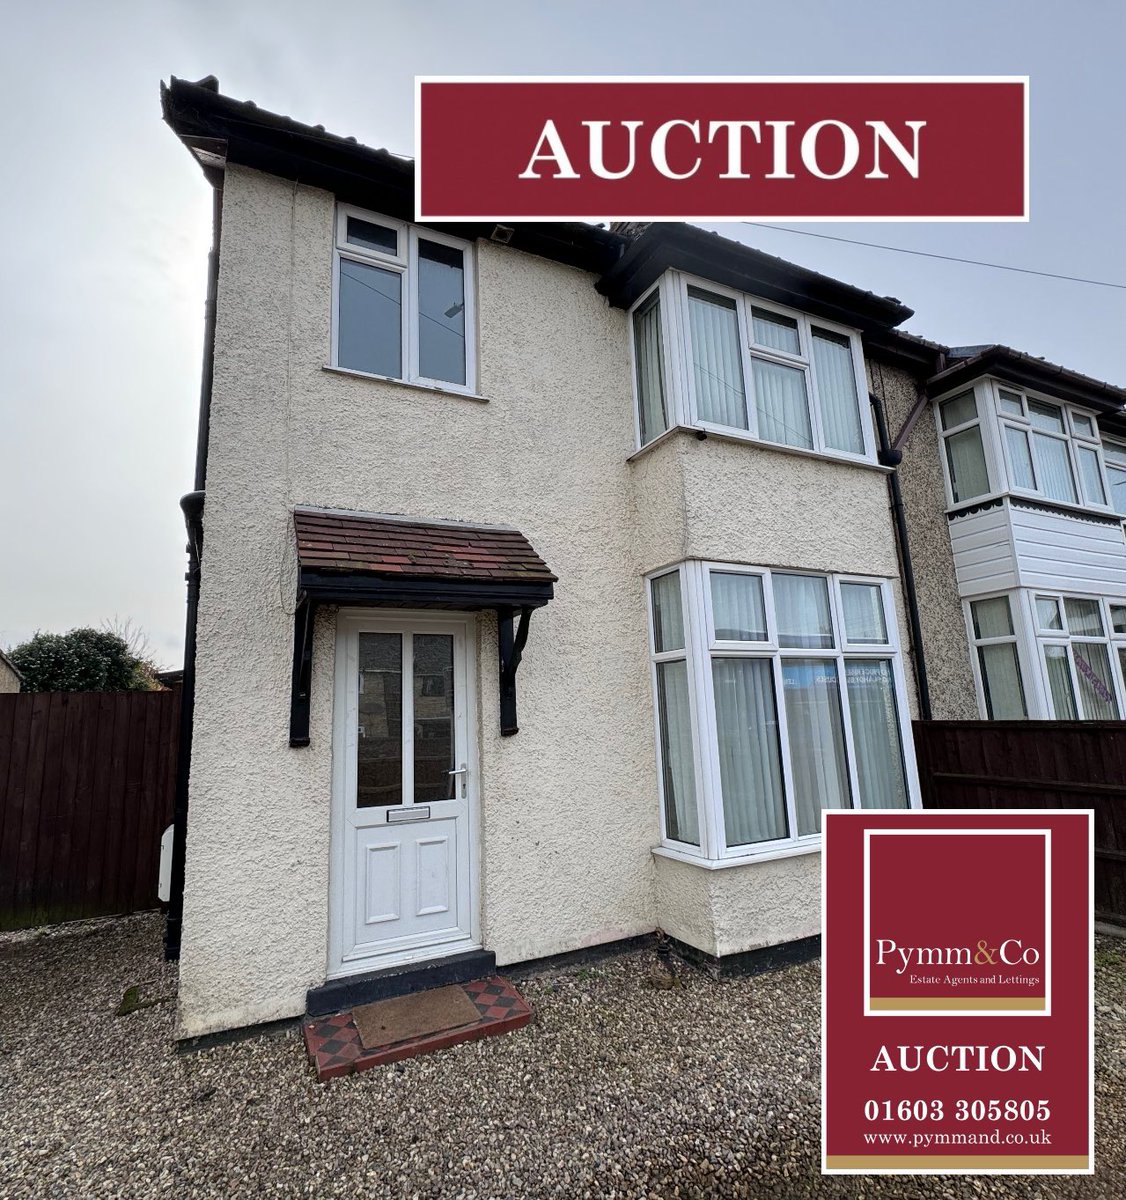 DON’T MISS OUT 🏠 🔨 Hanover Rd, NR2 Golden Triangle classic auction lot, 2 weeks to go pymmandcoauctions.co.uk/lot/details/11… Plumstead Rd, NR1 a classic ‘doer upper’ 3 weeks to go pymmandcoauctions.co.uk/lot/details/11… #auction #propertyauction #flip #refurb #renovation #project #norwich @pymmandco